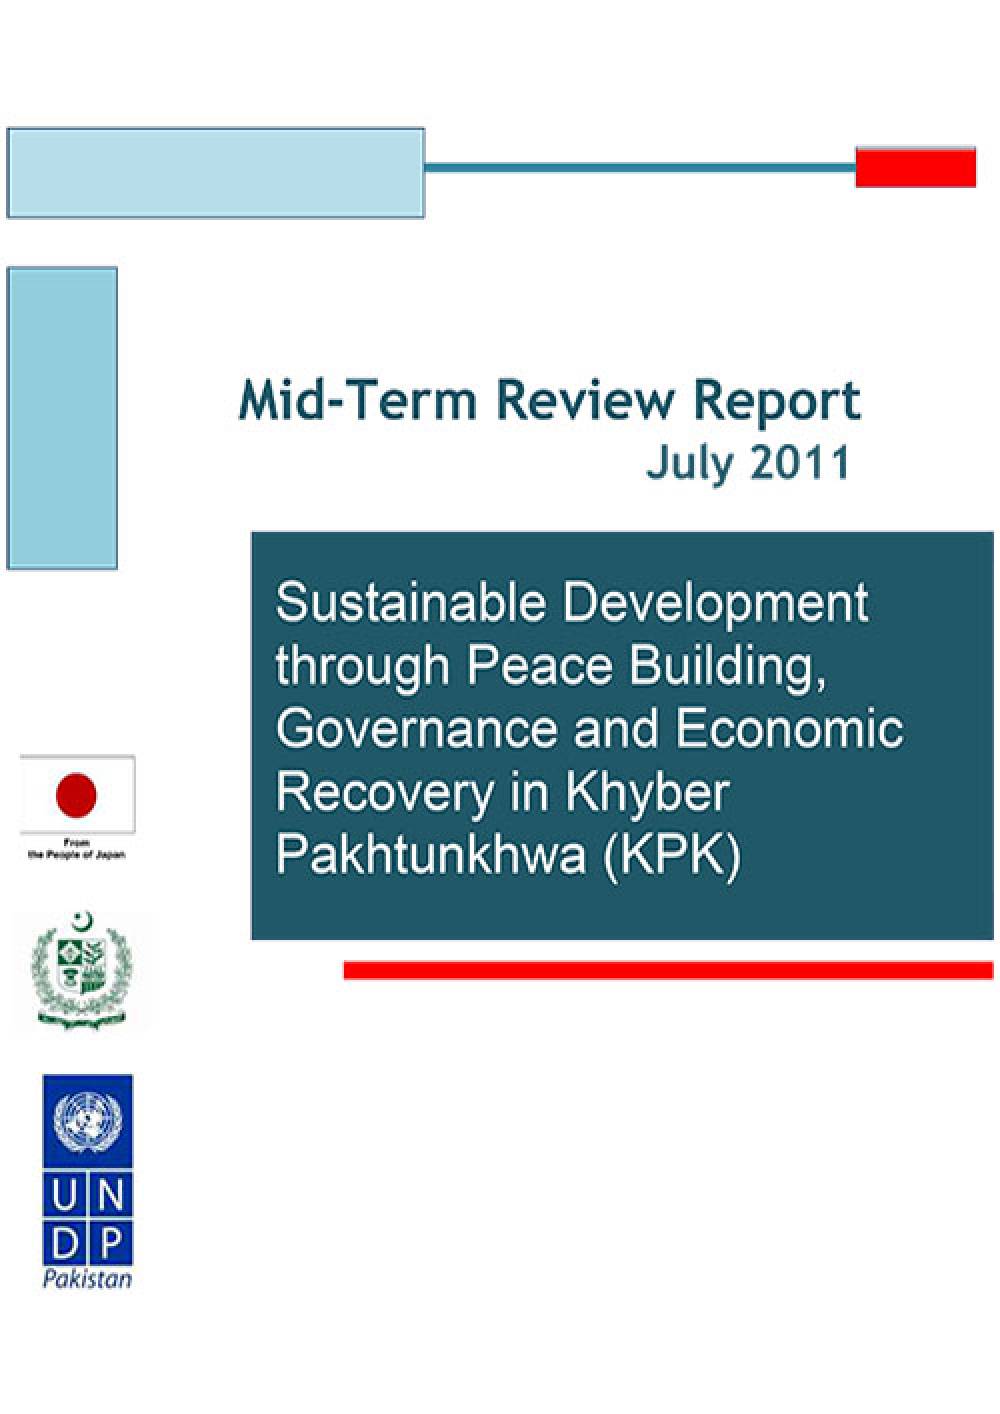 Sustainable Development through Peace Building, Governance and Economic Recovery in Khyber Pakhtunkhwa Project